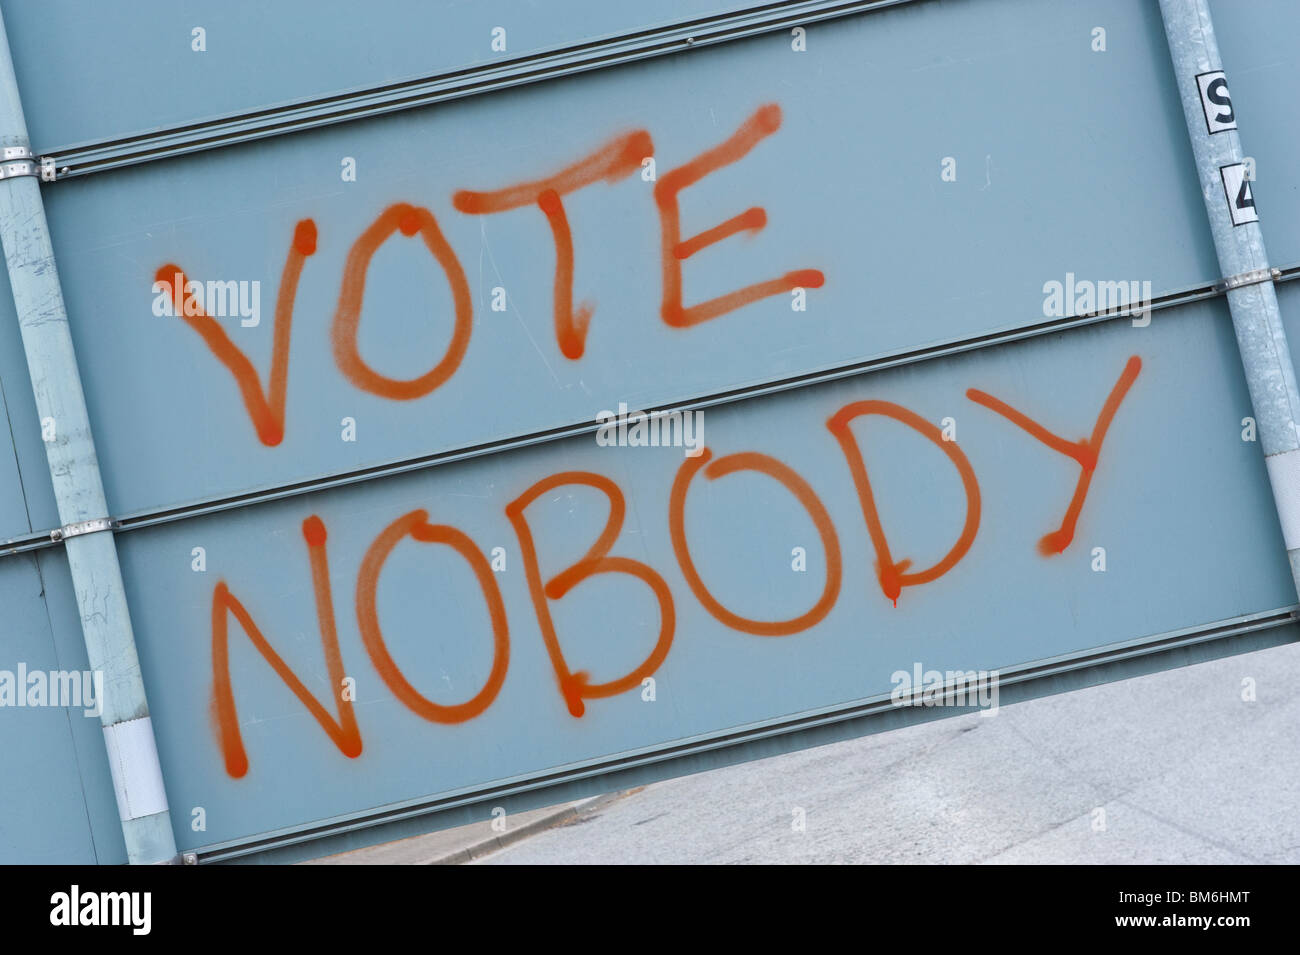 VOTE NOBODY graffiti on rear of roadsign in Cardiff South Wales UK Stock Photo